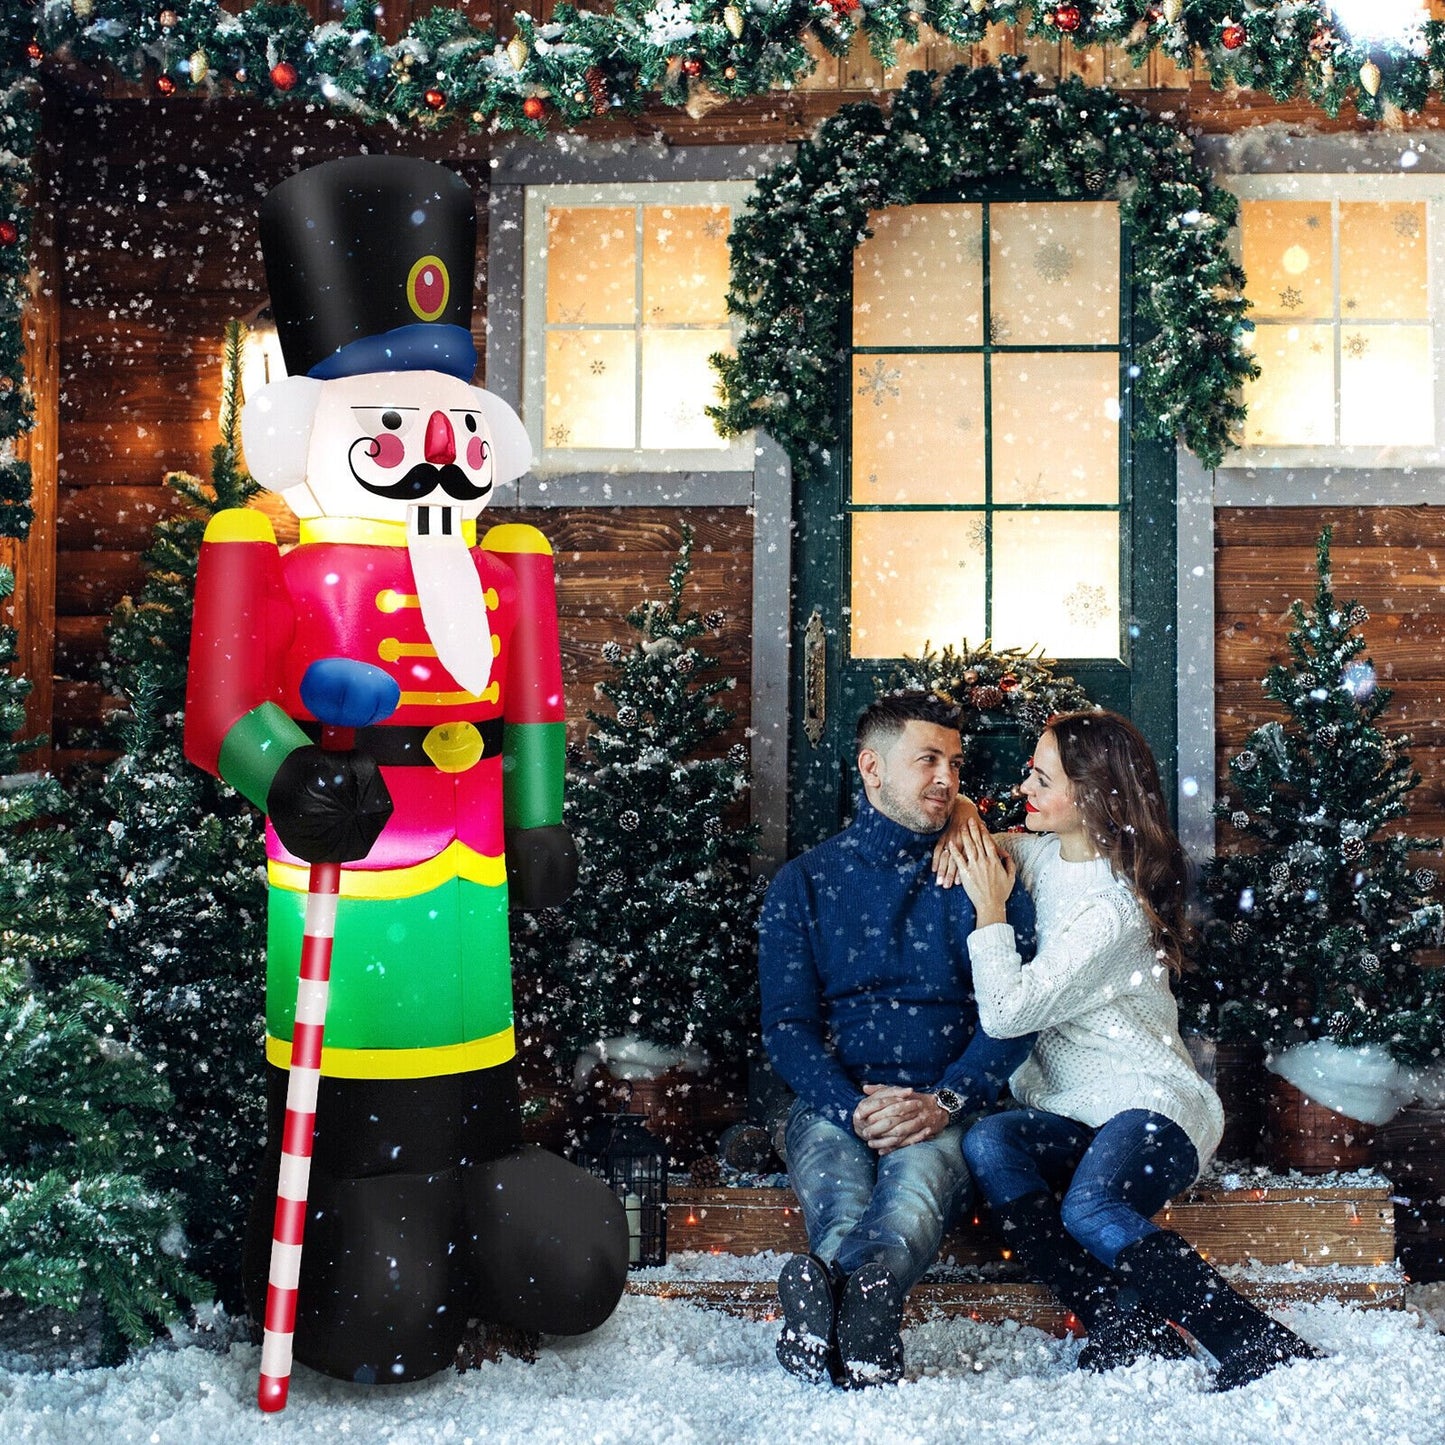 8 Feet Inflatable Nutcracker Soldier with 2 Built-in LED Lights, Multicolor - Gallery Canada